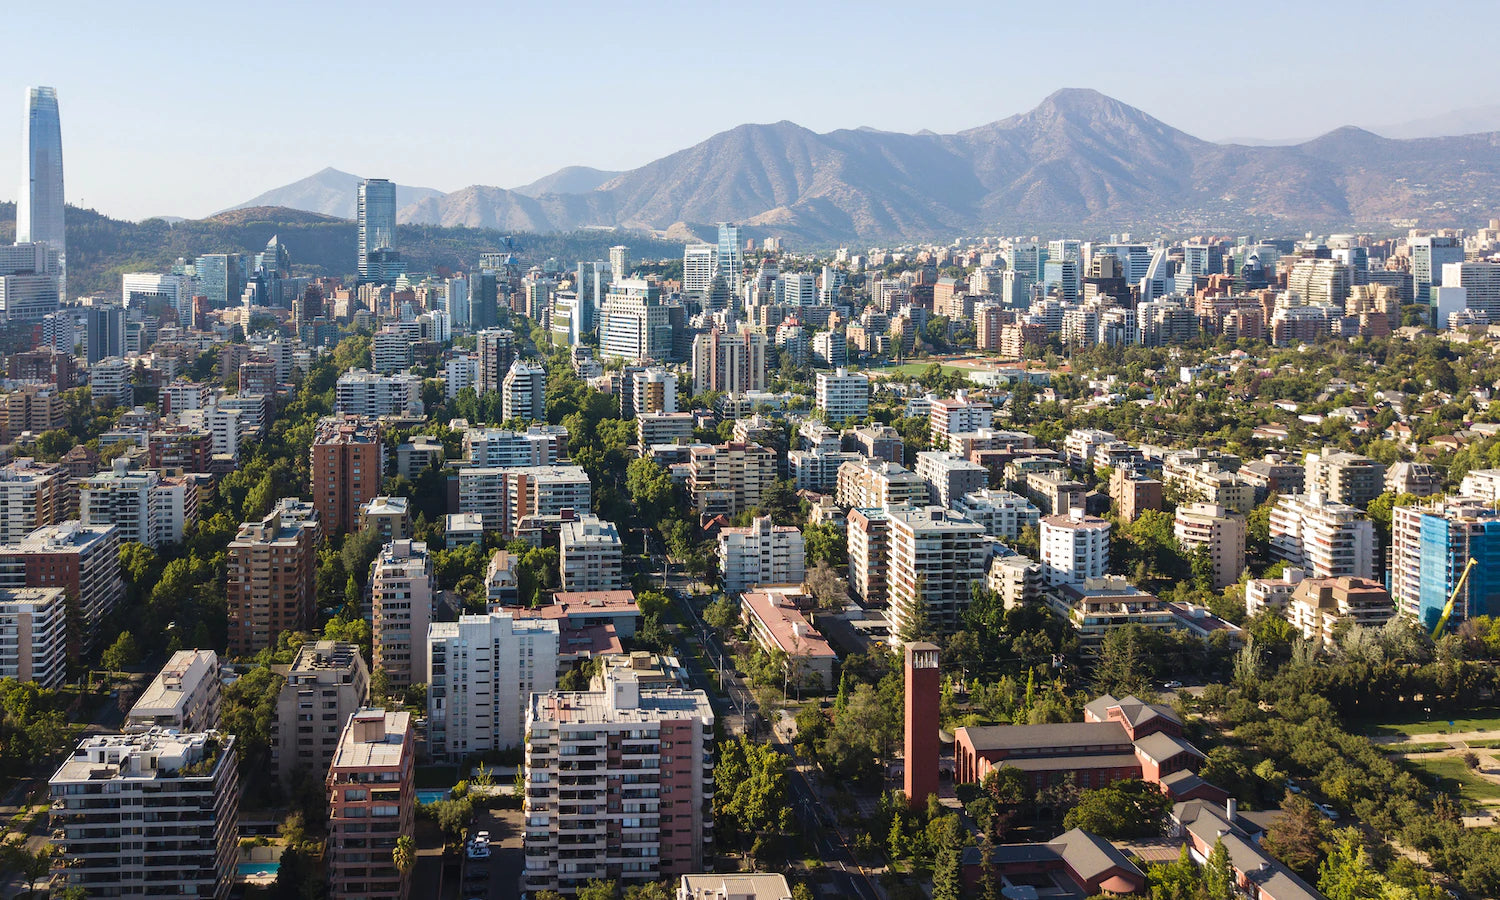 Santiago - The Splendour of the Southern Andes